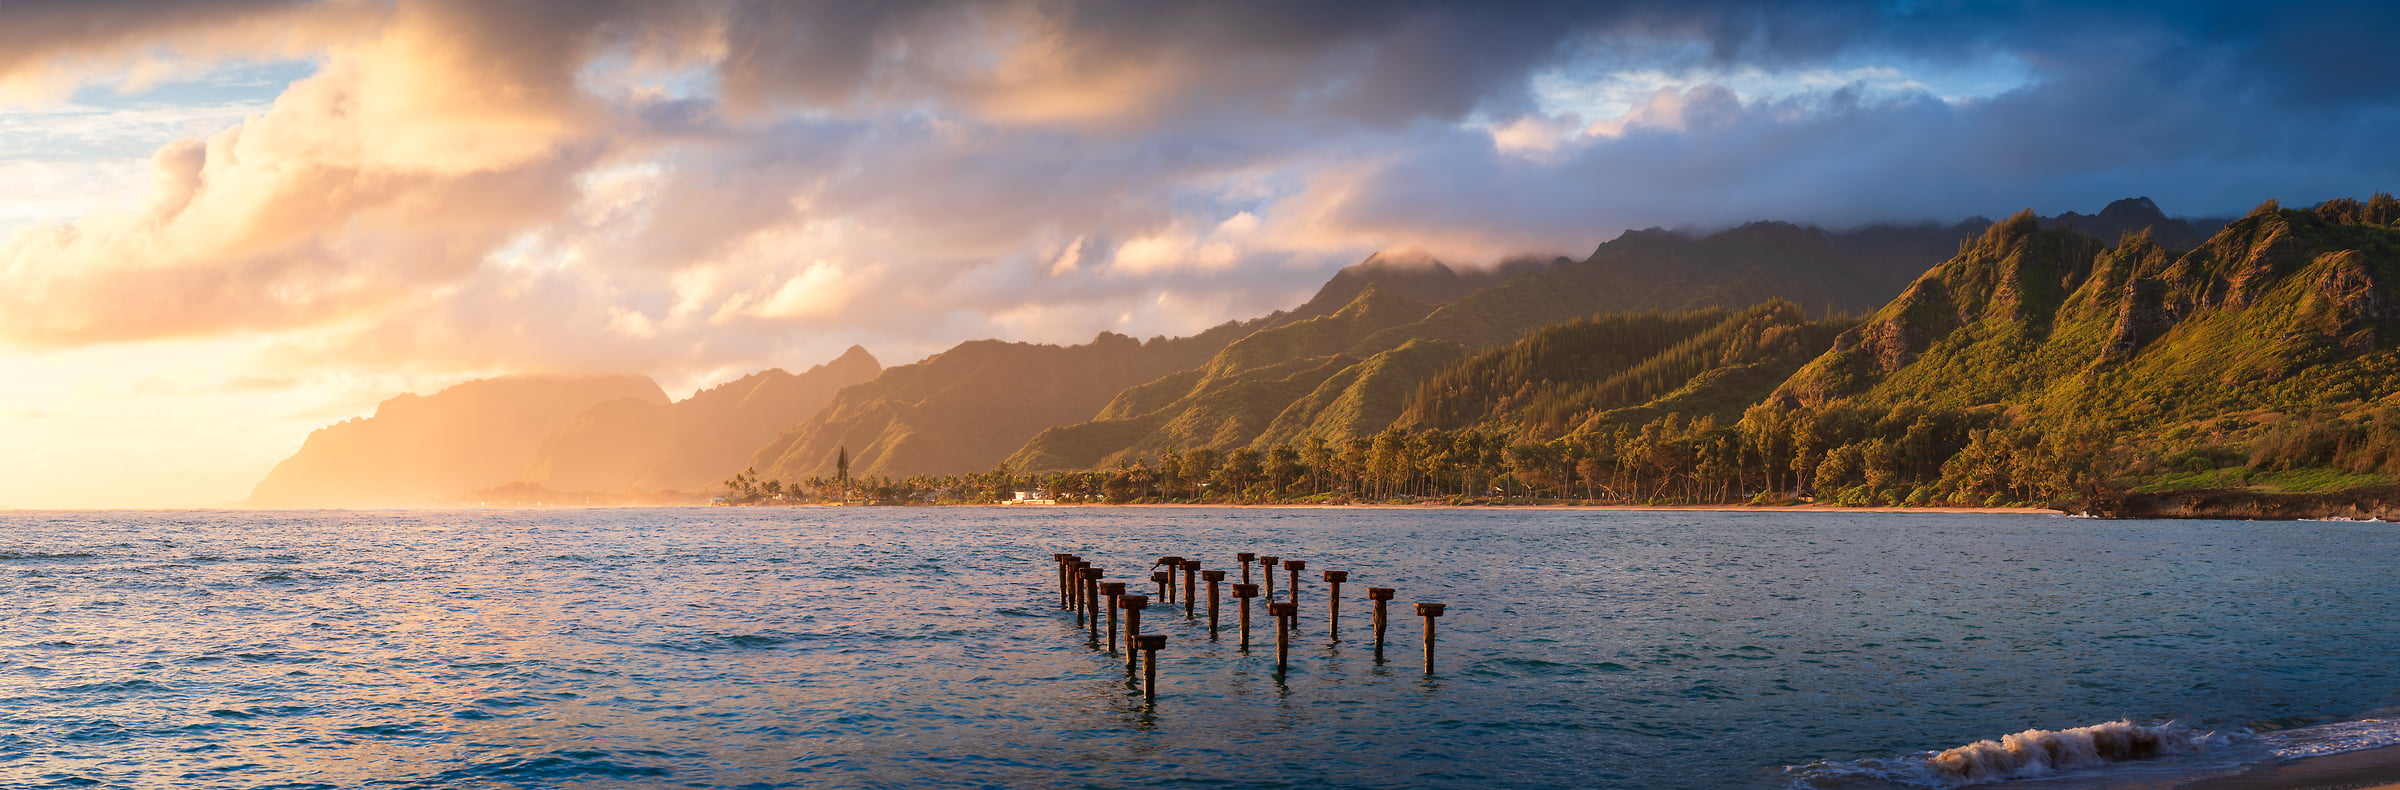 293 megapixels! A very high resolution, large-format VAST photo print of paradise - a Hawaii landscape at sunset with the ocean and mountains; landscape photograph created by Jeff Lewis in Laie, Hawaii